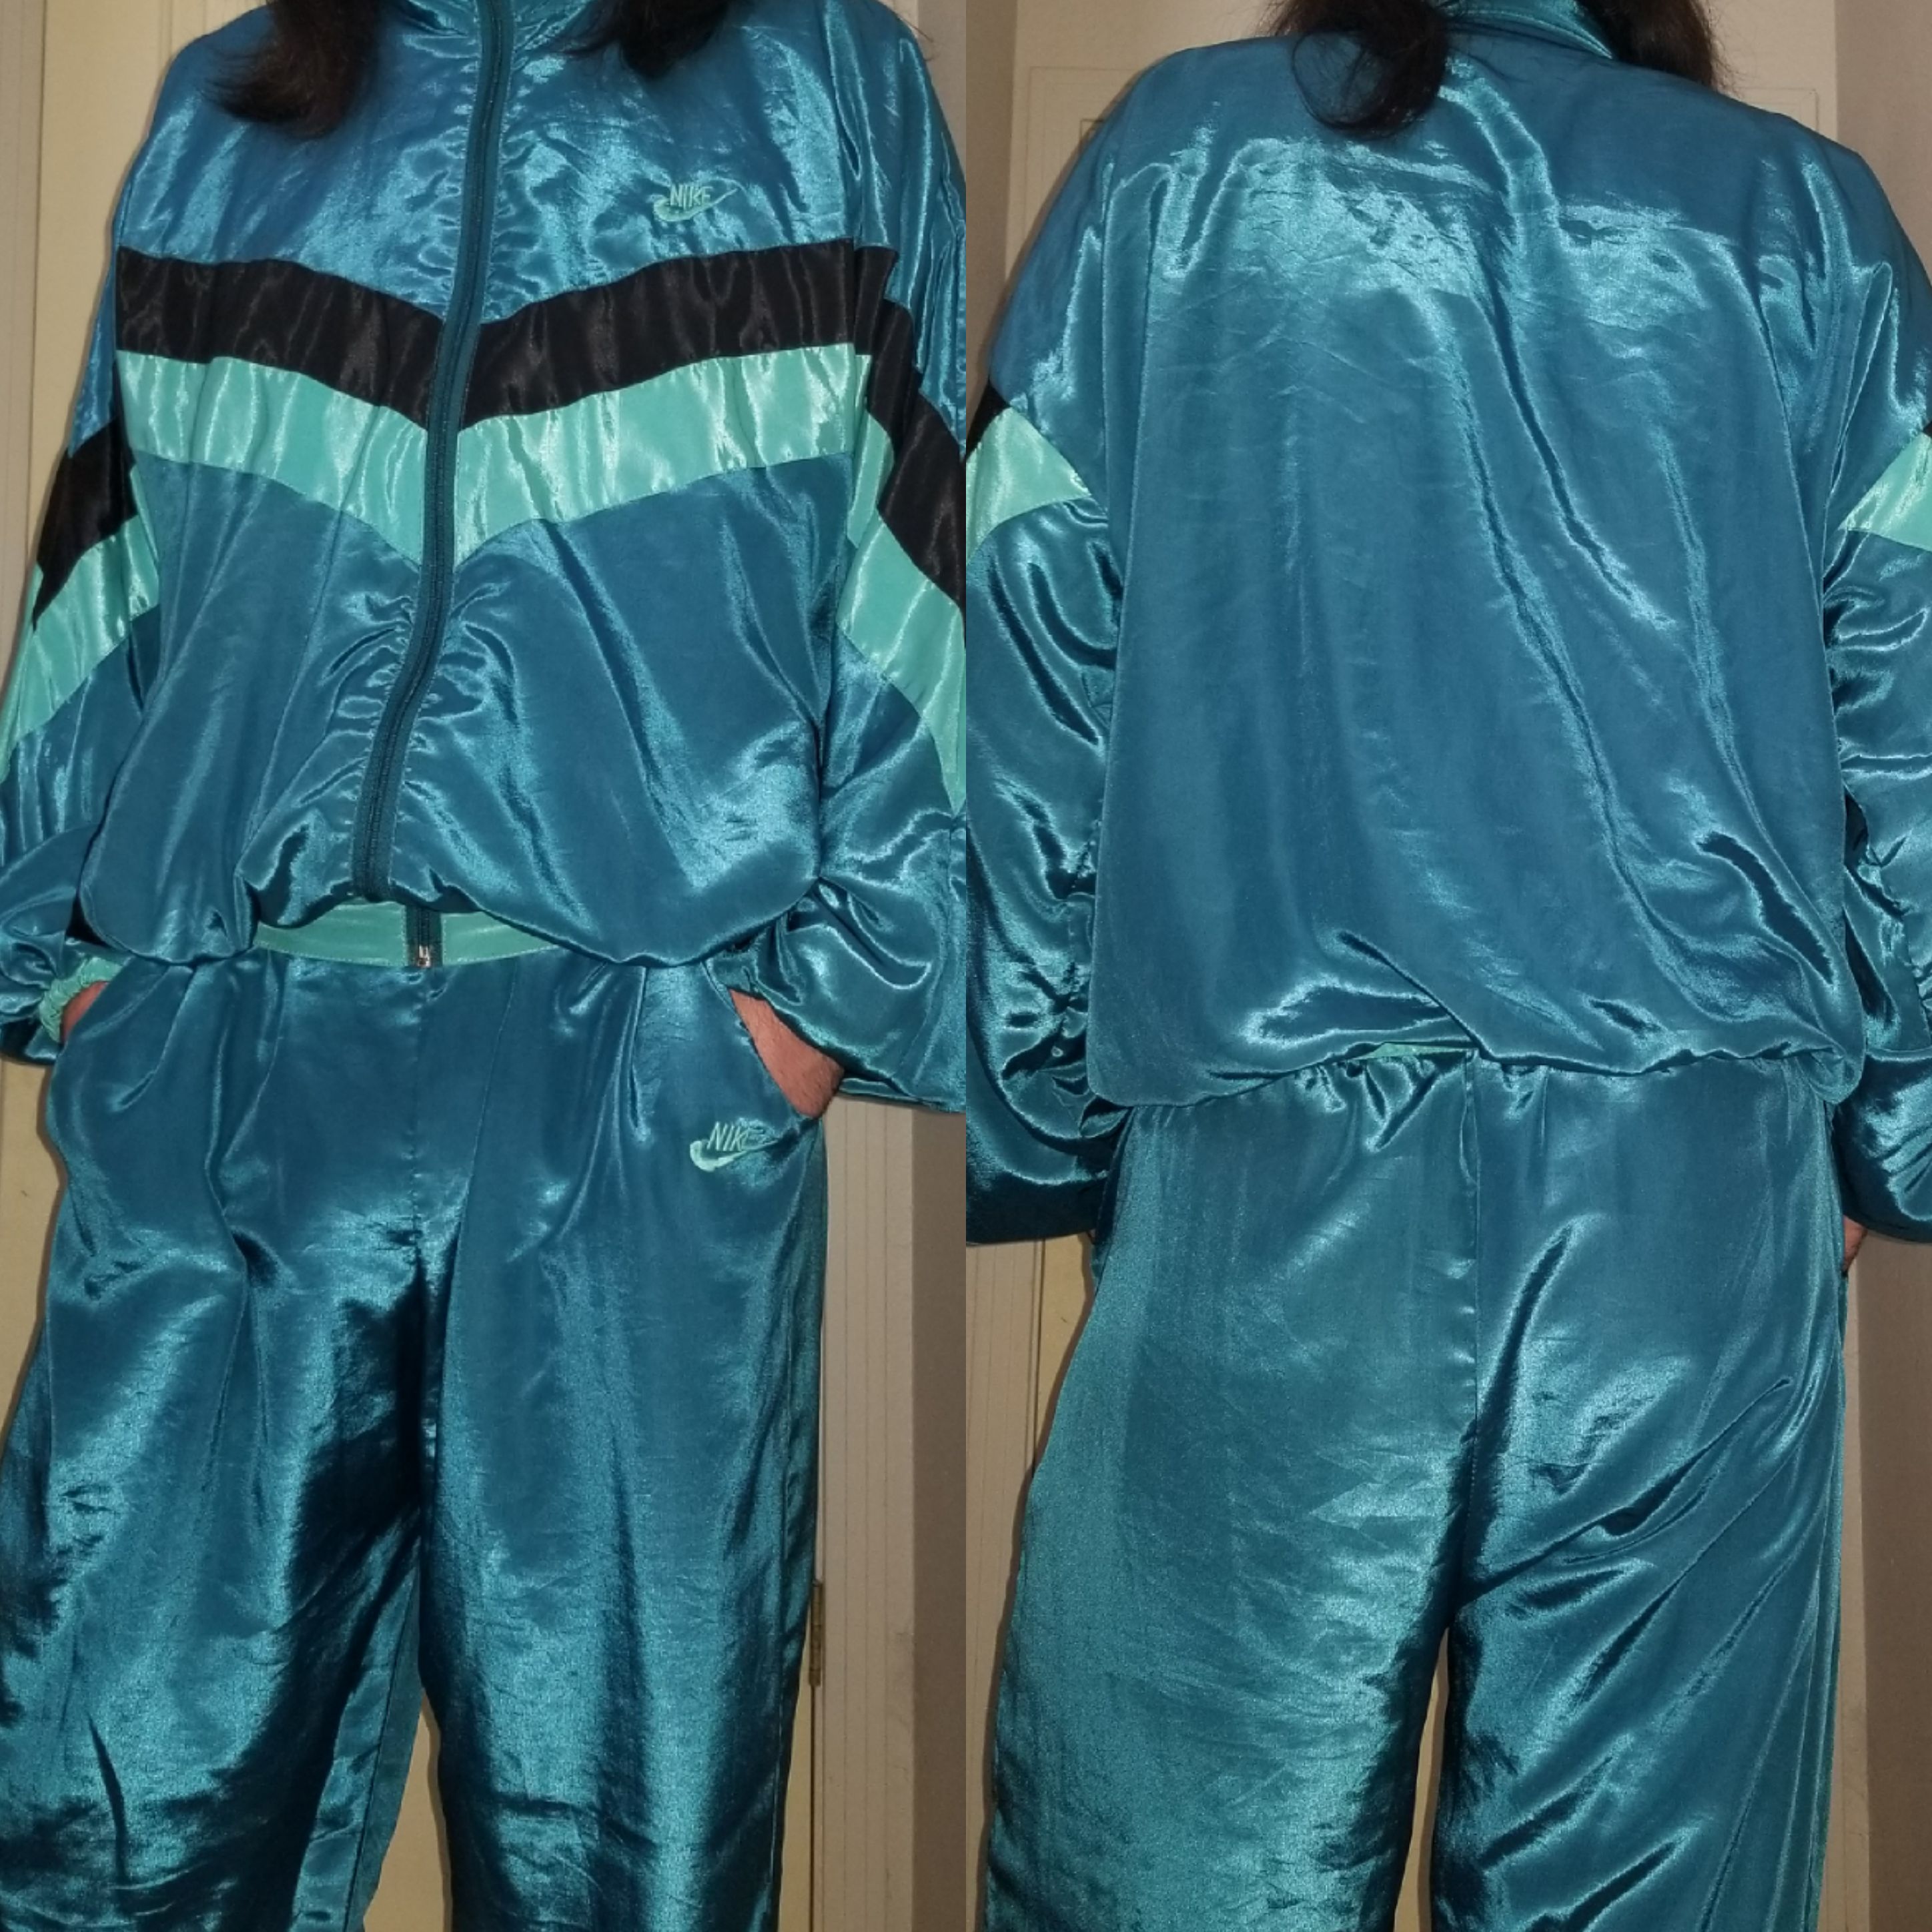 My new suuuuper shiny silk nike suit